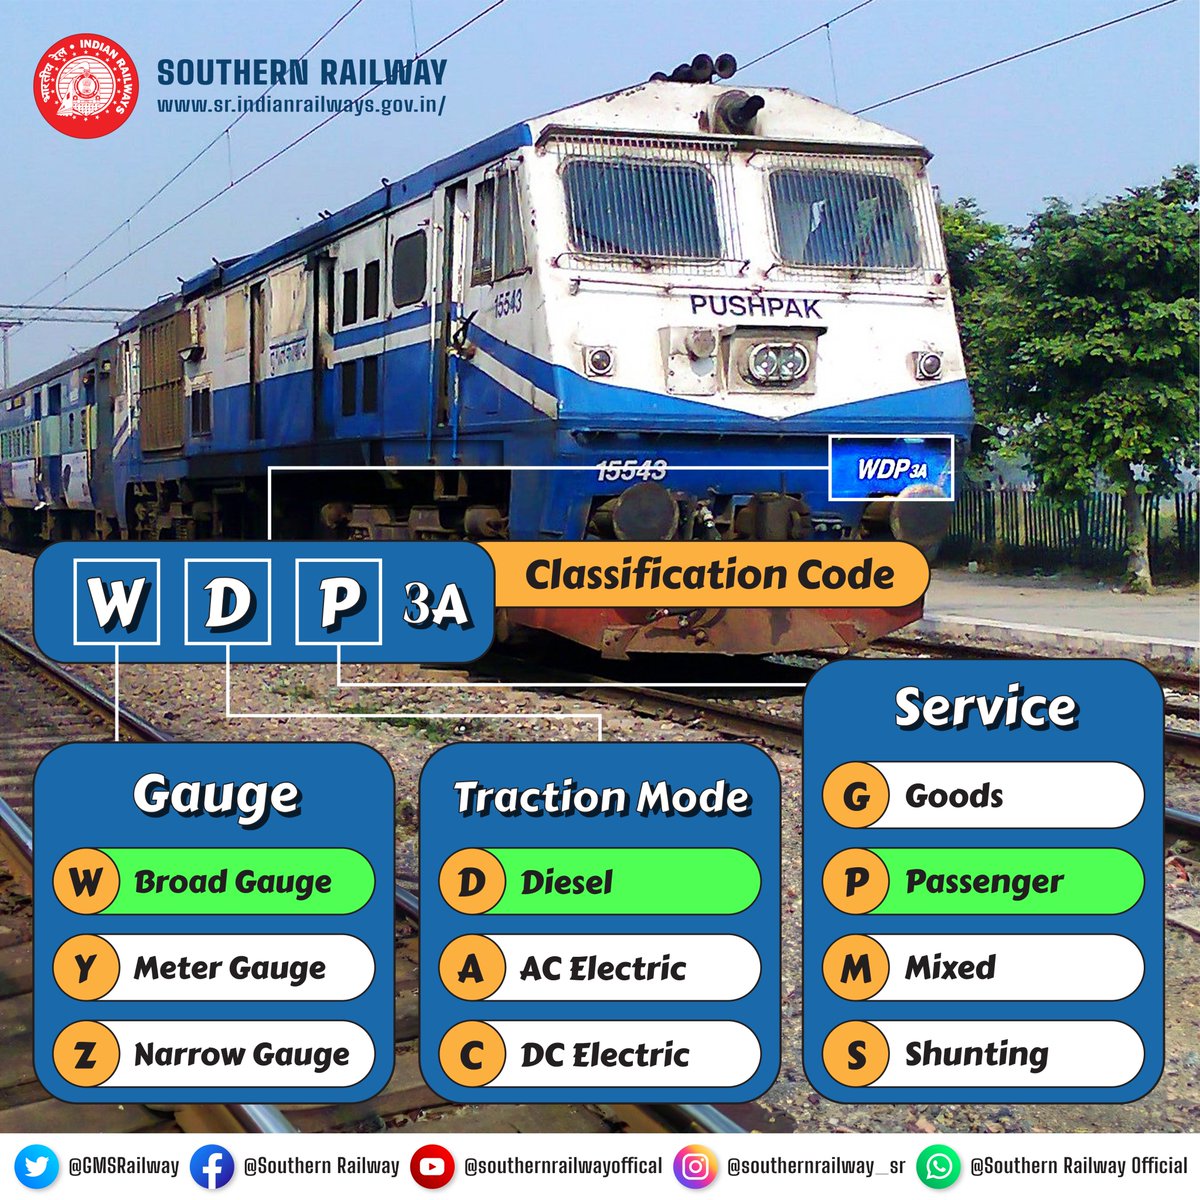 #KnowYourLocomotives

Decode the Indian locomotive coding! 
WDP3A - W(Broad Gauge) D(Diesel) P(Passenger) 3A(horse power)

Learn the alphanumeric terminologies that define our rail workhorses.

#RailwayTerminology #LocomotiveCodes #IndianRailways #SouthernRailway